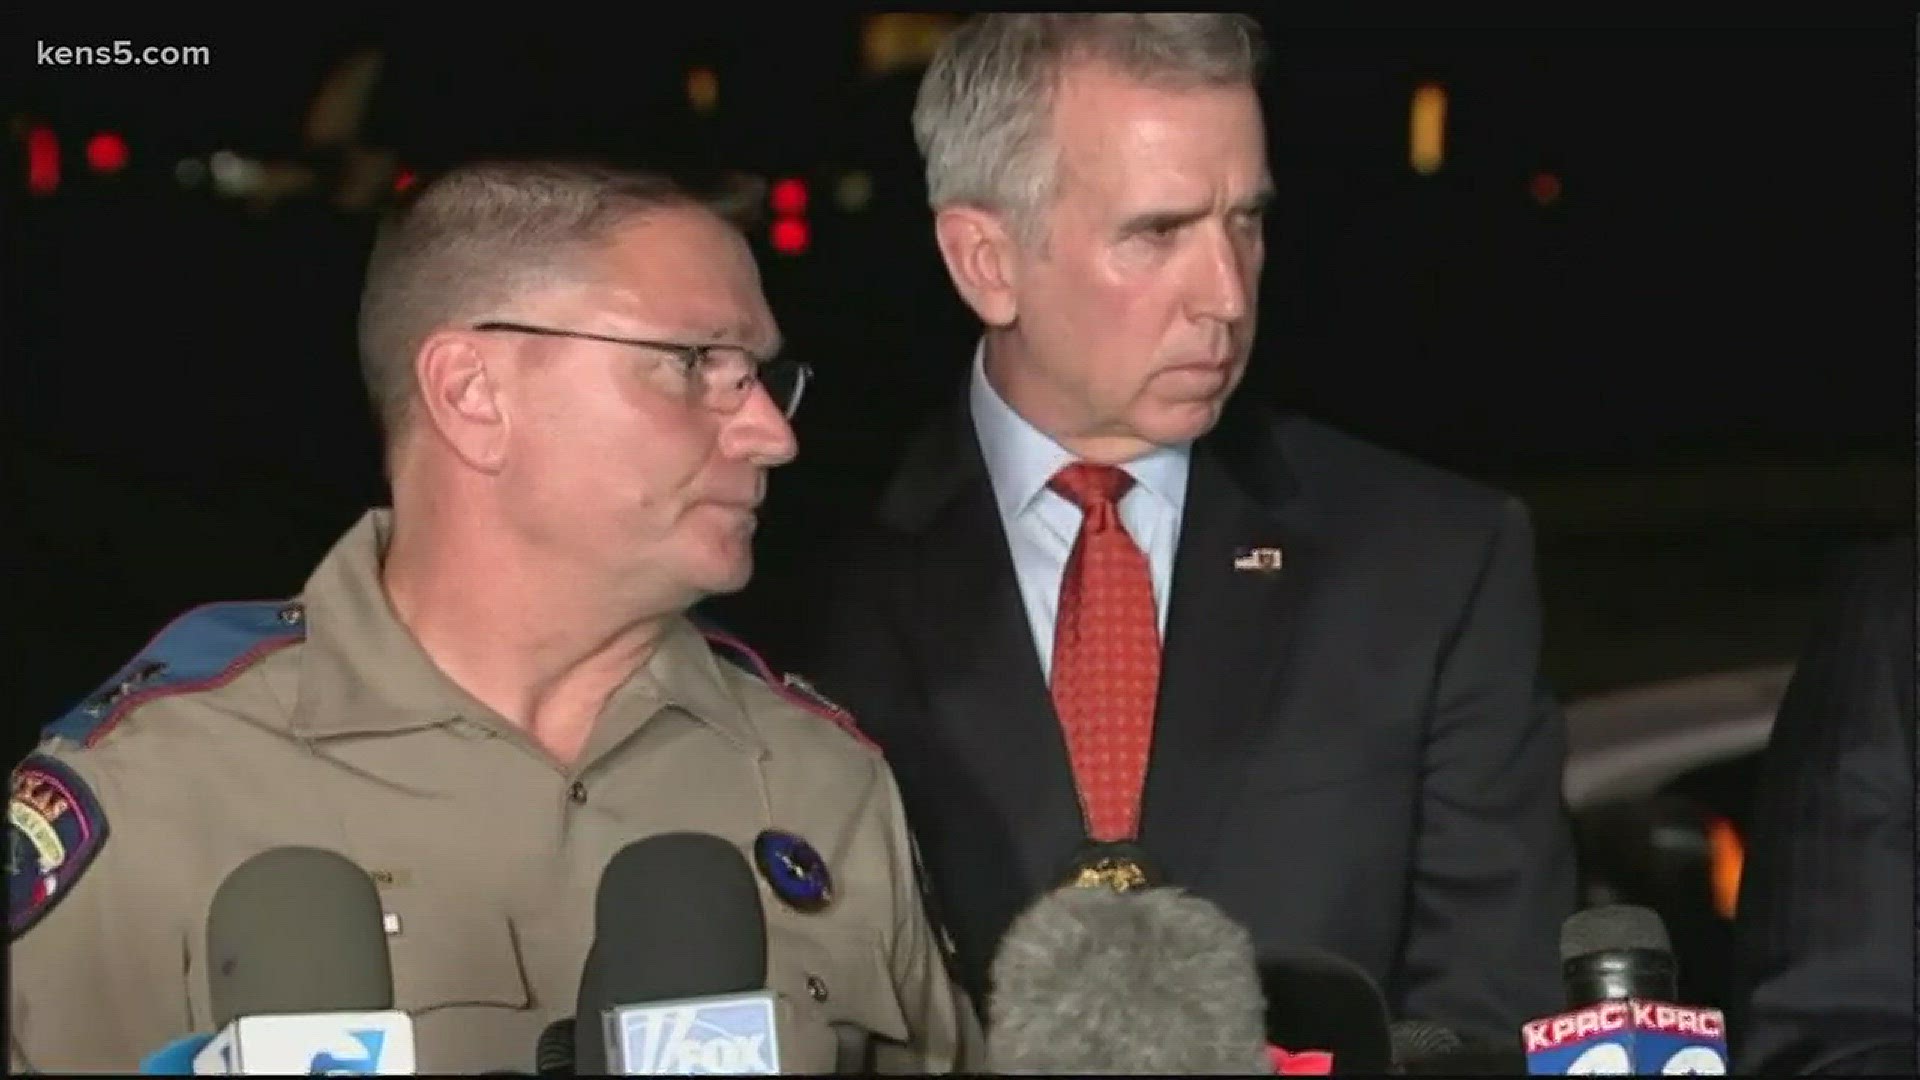 Texas officials say they believe the gunman came to the church "with a purpose and a mission."